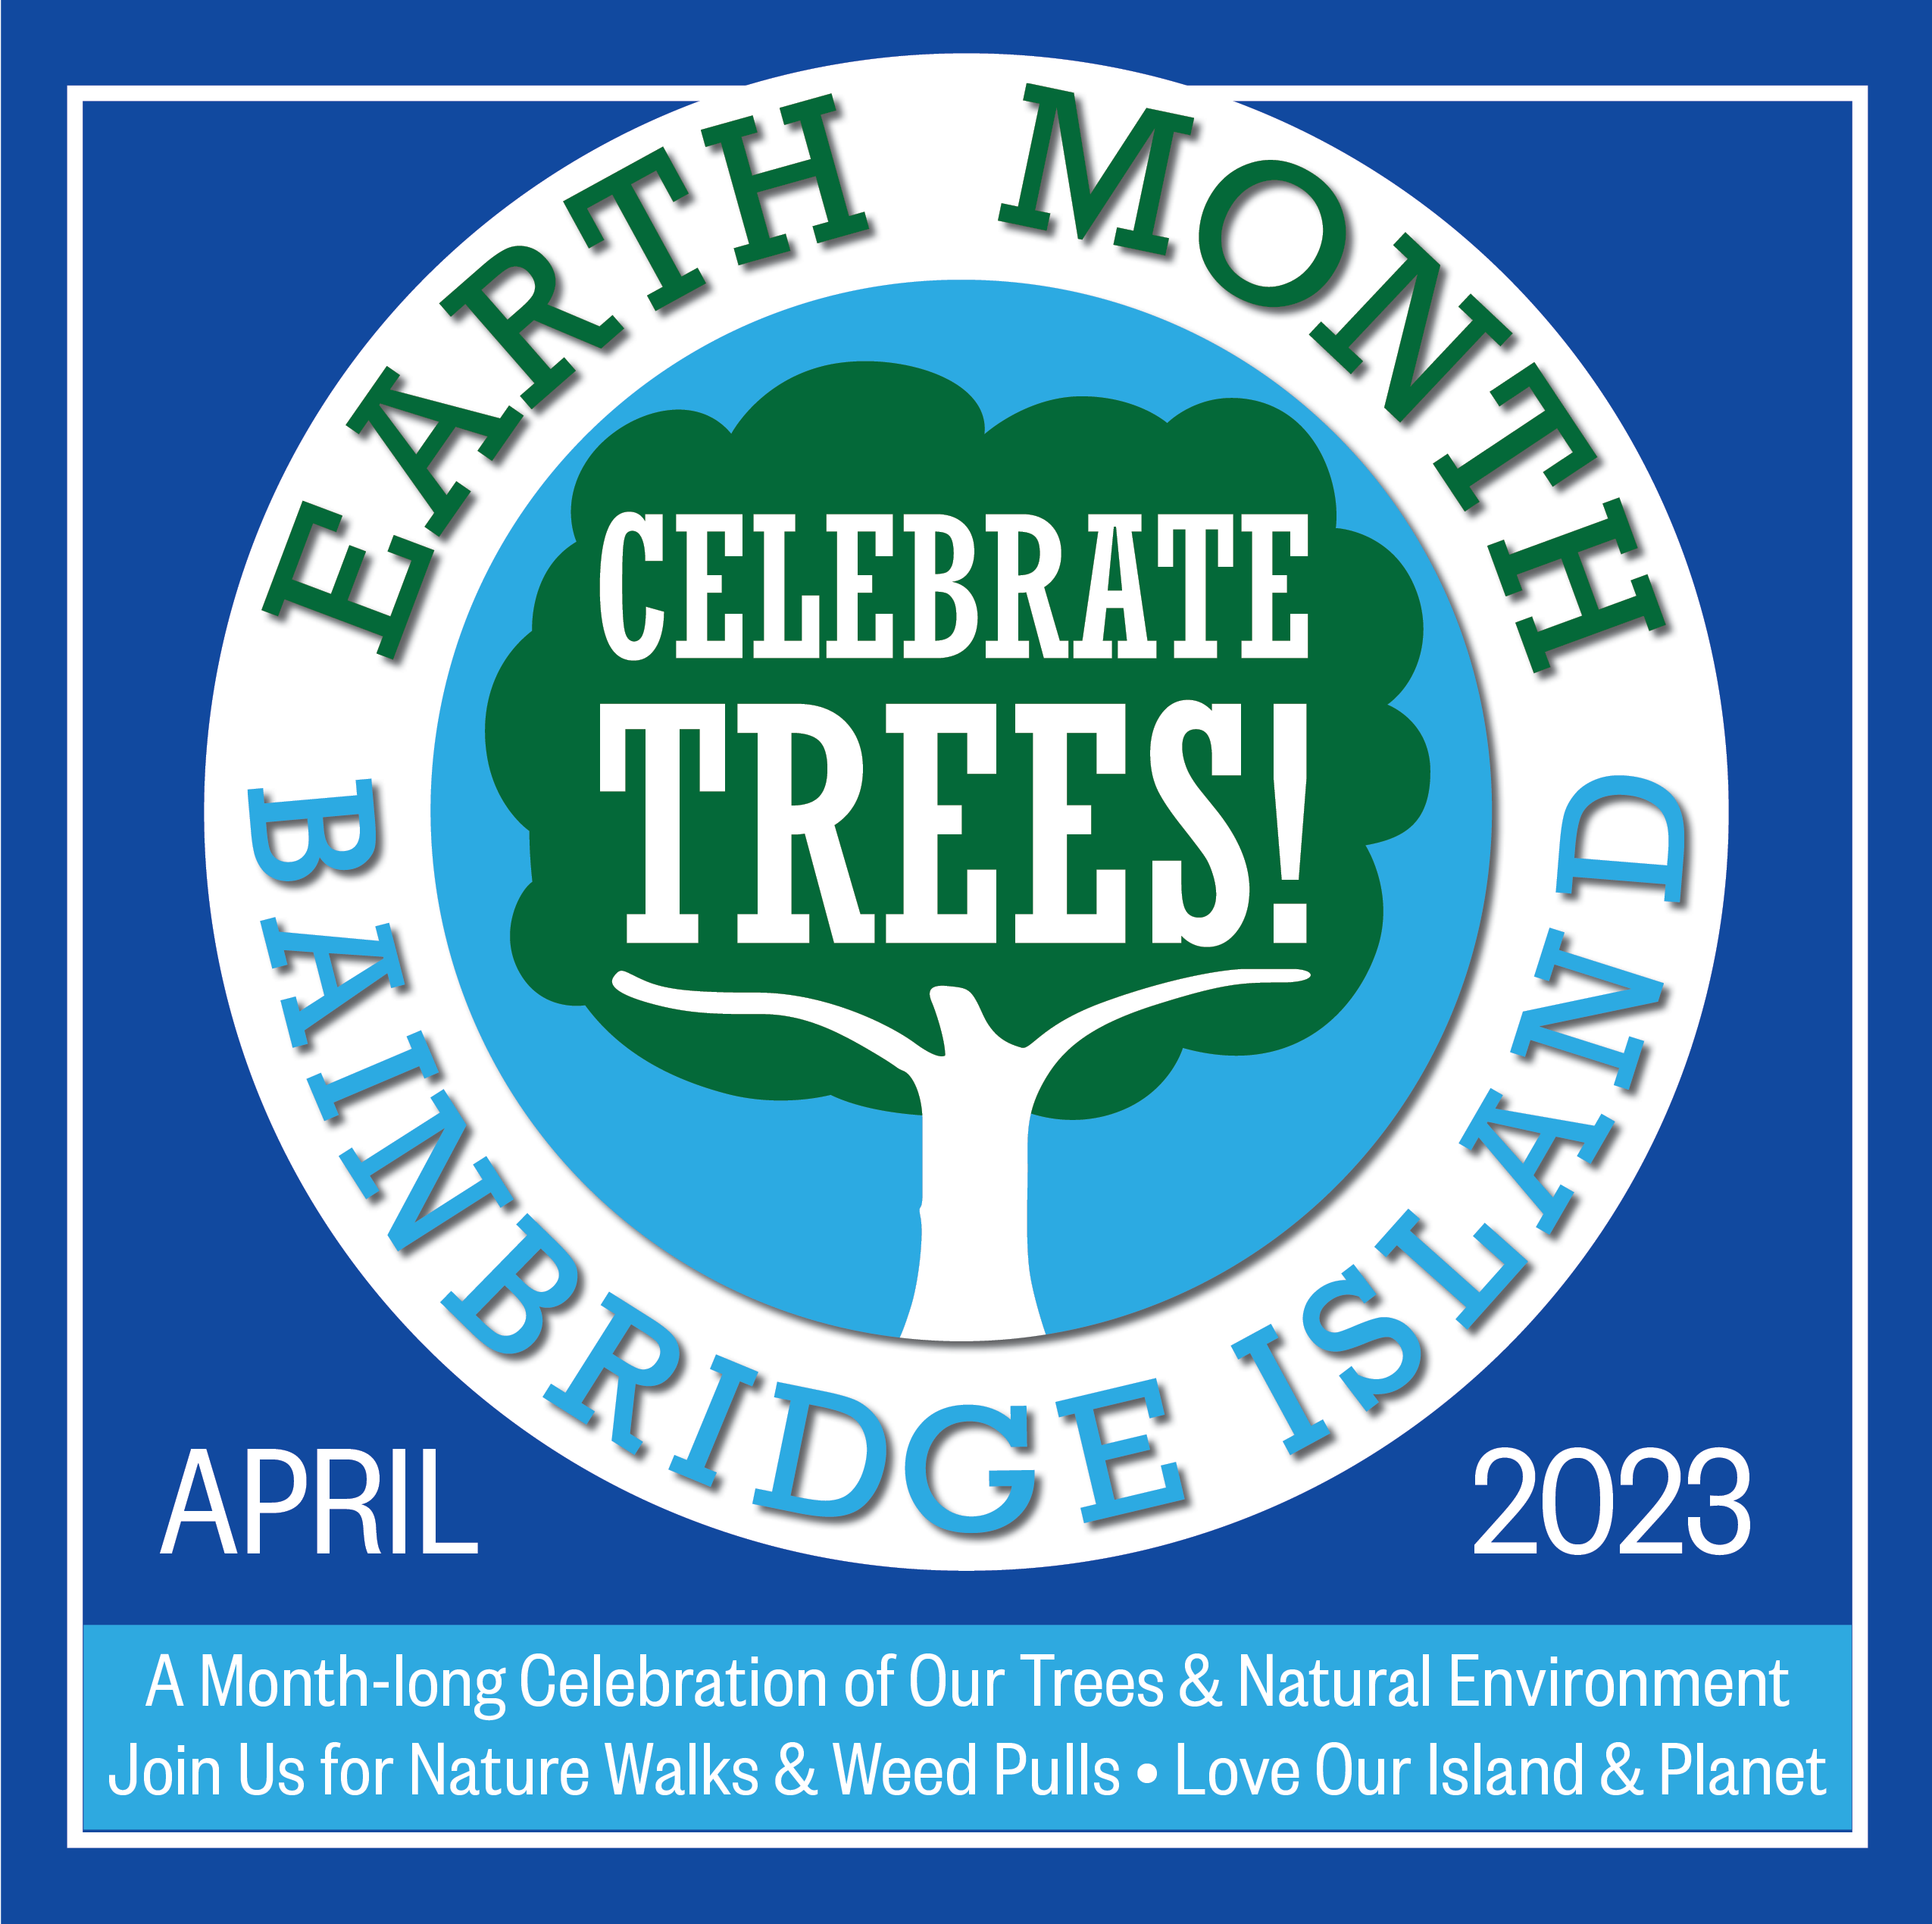 Celebrate Earth Month all month in April Bainbridge Island Parks